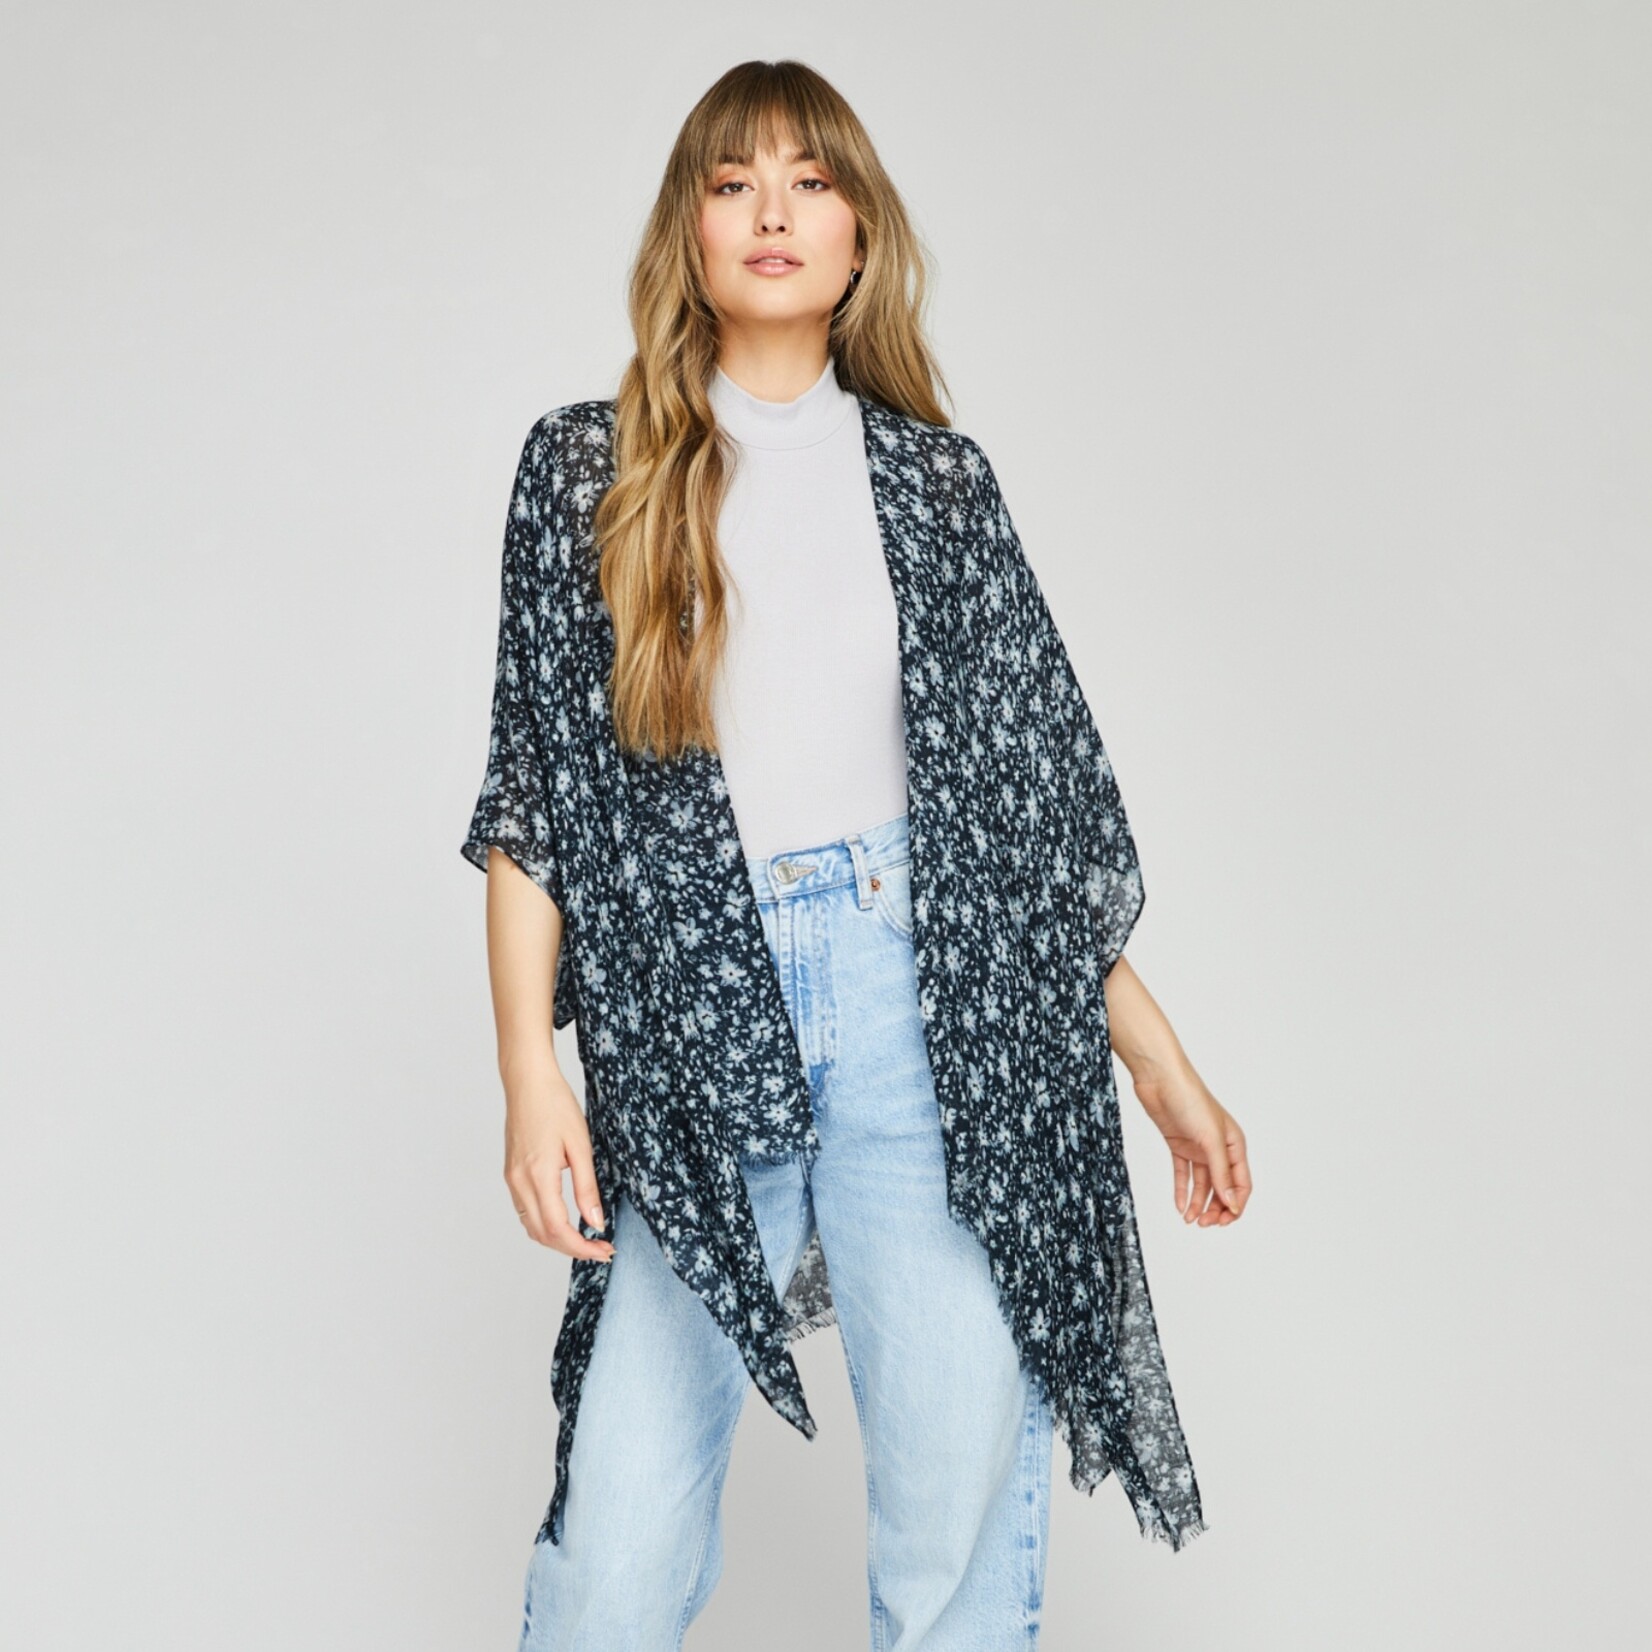 Gentle Fawn Dawn Cover-up - Black Ditsy